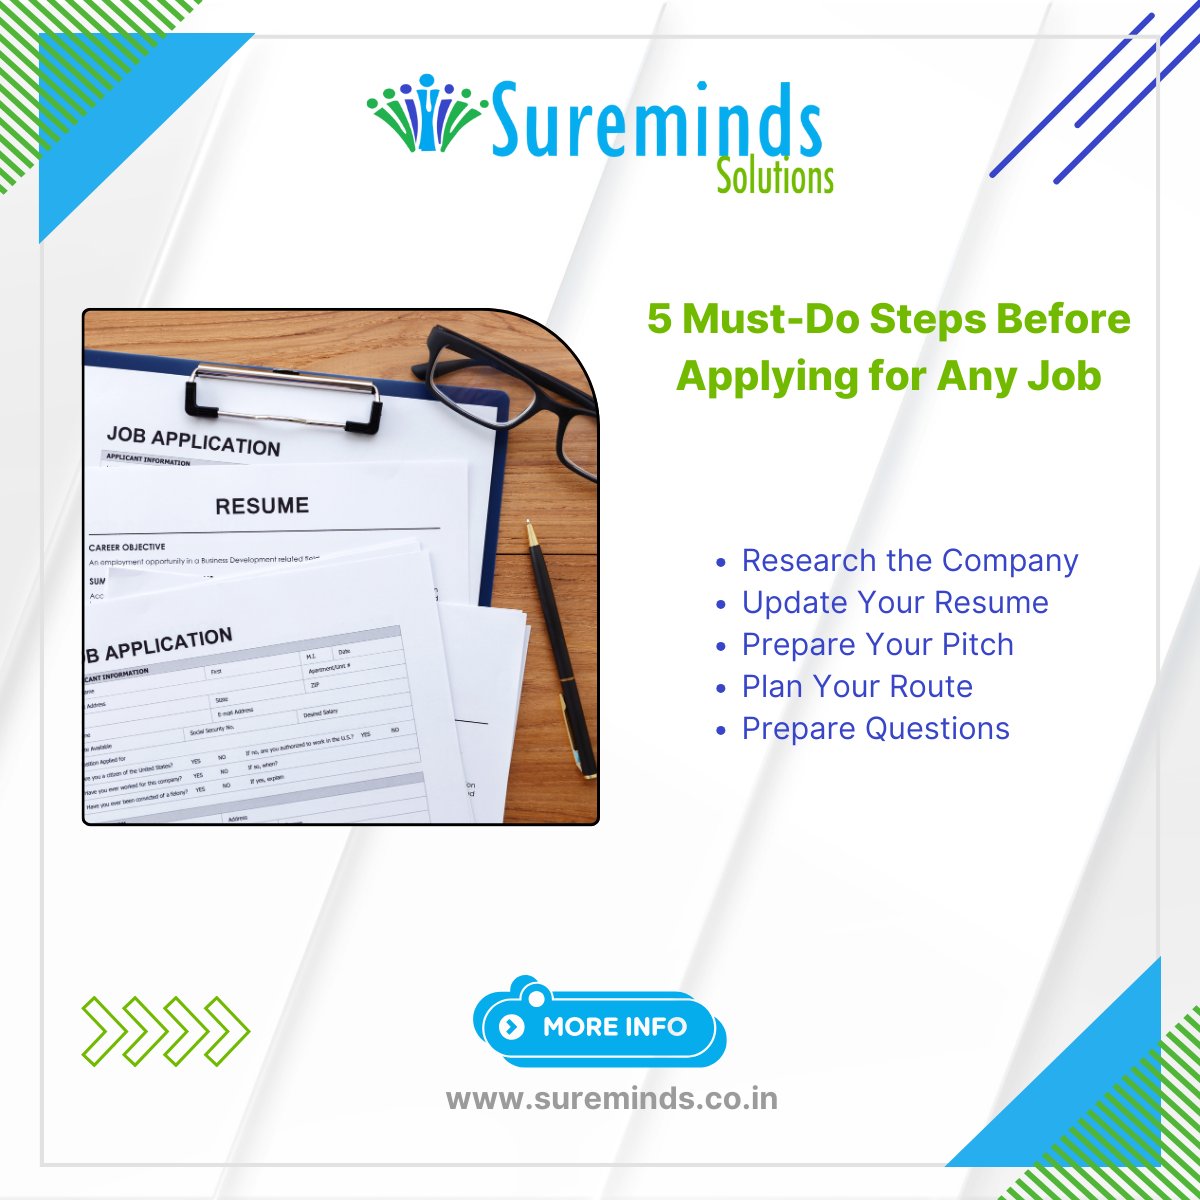 Are you ready to stand out in your job application process? 

Sureminds Solutions Pvt. Ltd., an efficient recruitment agency, guides job seekers with these 5 essential steps before applying for any job.

#JobSearch #CareerAdvice #ResumeTips #InterviewPrep #JobHunt…